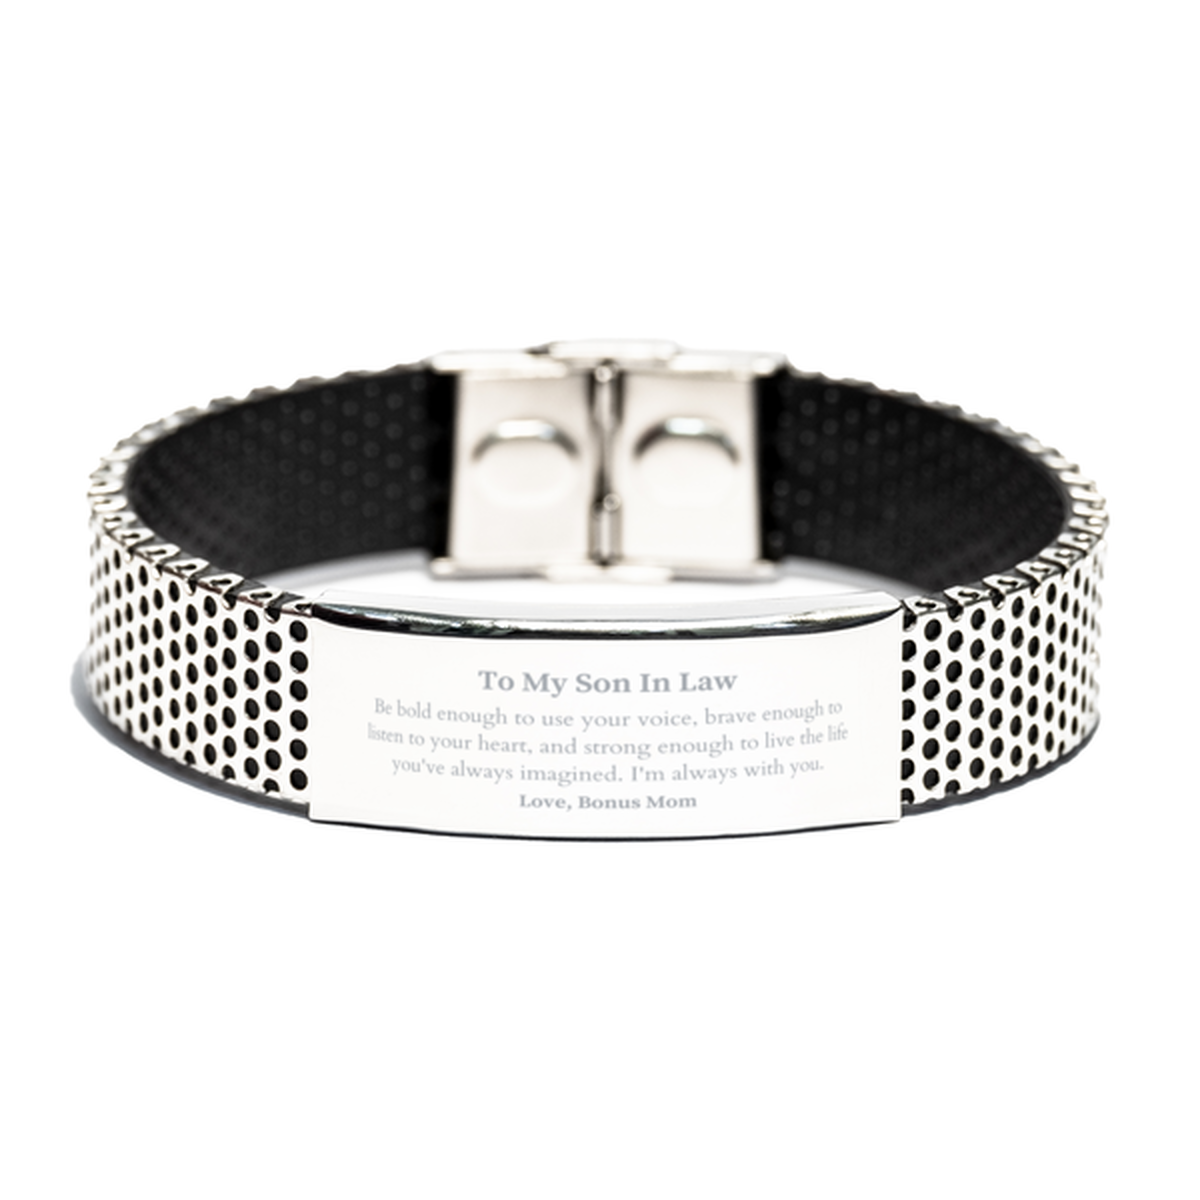 Keepsake Son In Law Stainless Steel Bracelet Gift Idea Graduation Christmas Birthday Son In Law from Bonus Mom, Son In Law Be bold enough to use your voice, brave enough to listen to your heart. Love, Bonus Mom